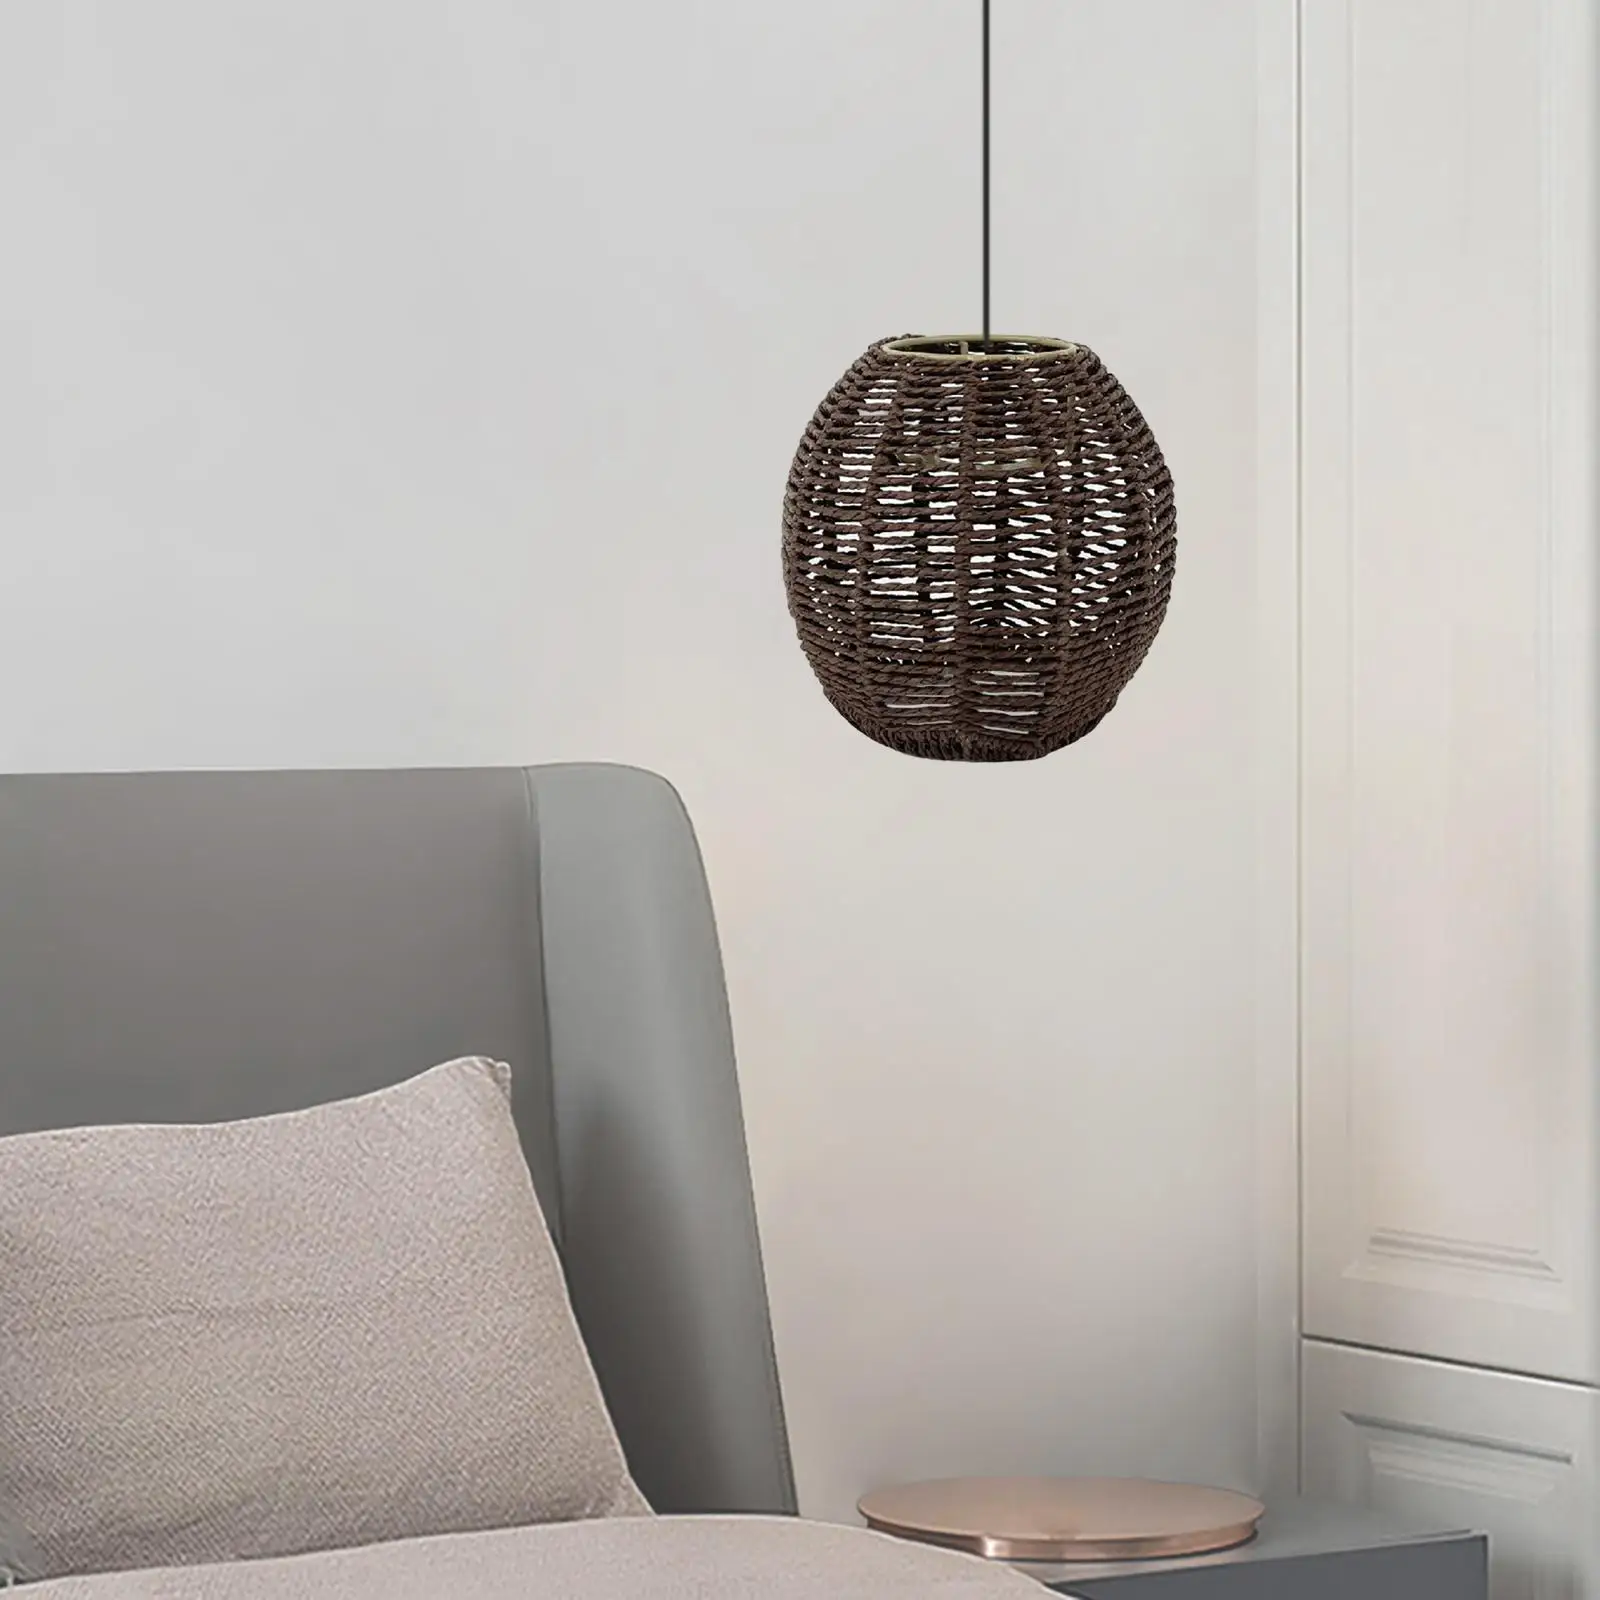 Pendant Lamp Shade Wicker Woven Ceiling Light Shade Rattan Hanging Light Fixture Lampshade for Kitchen Restaurant Decoration